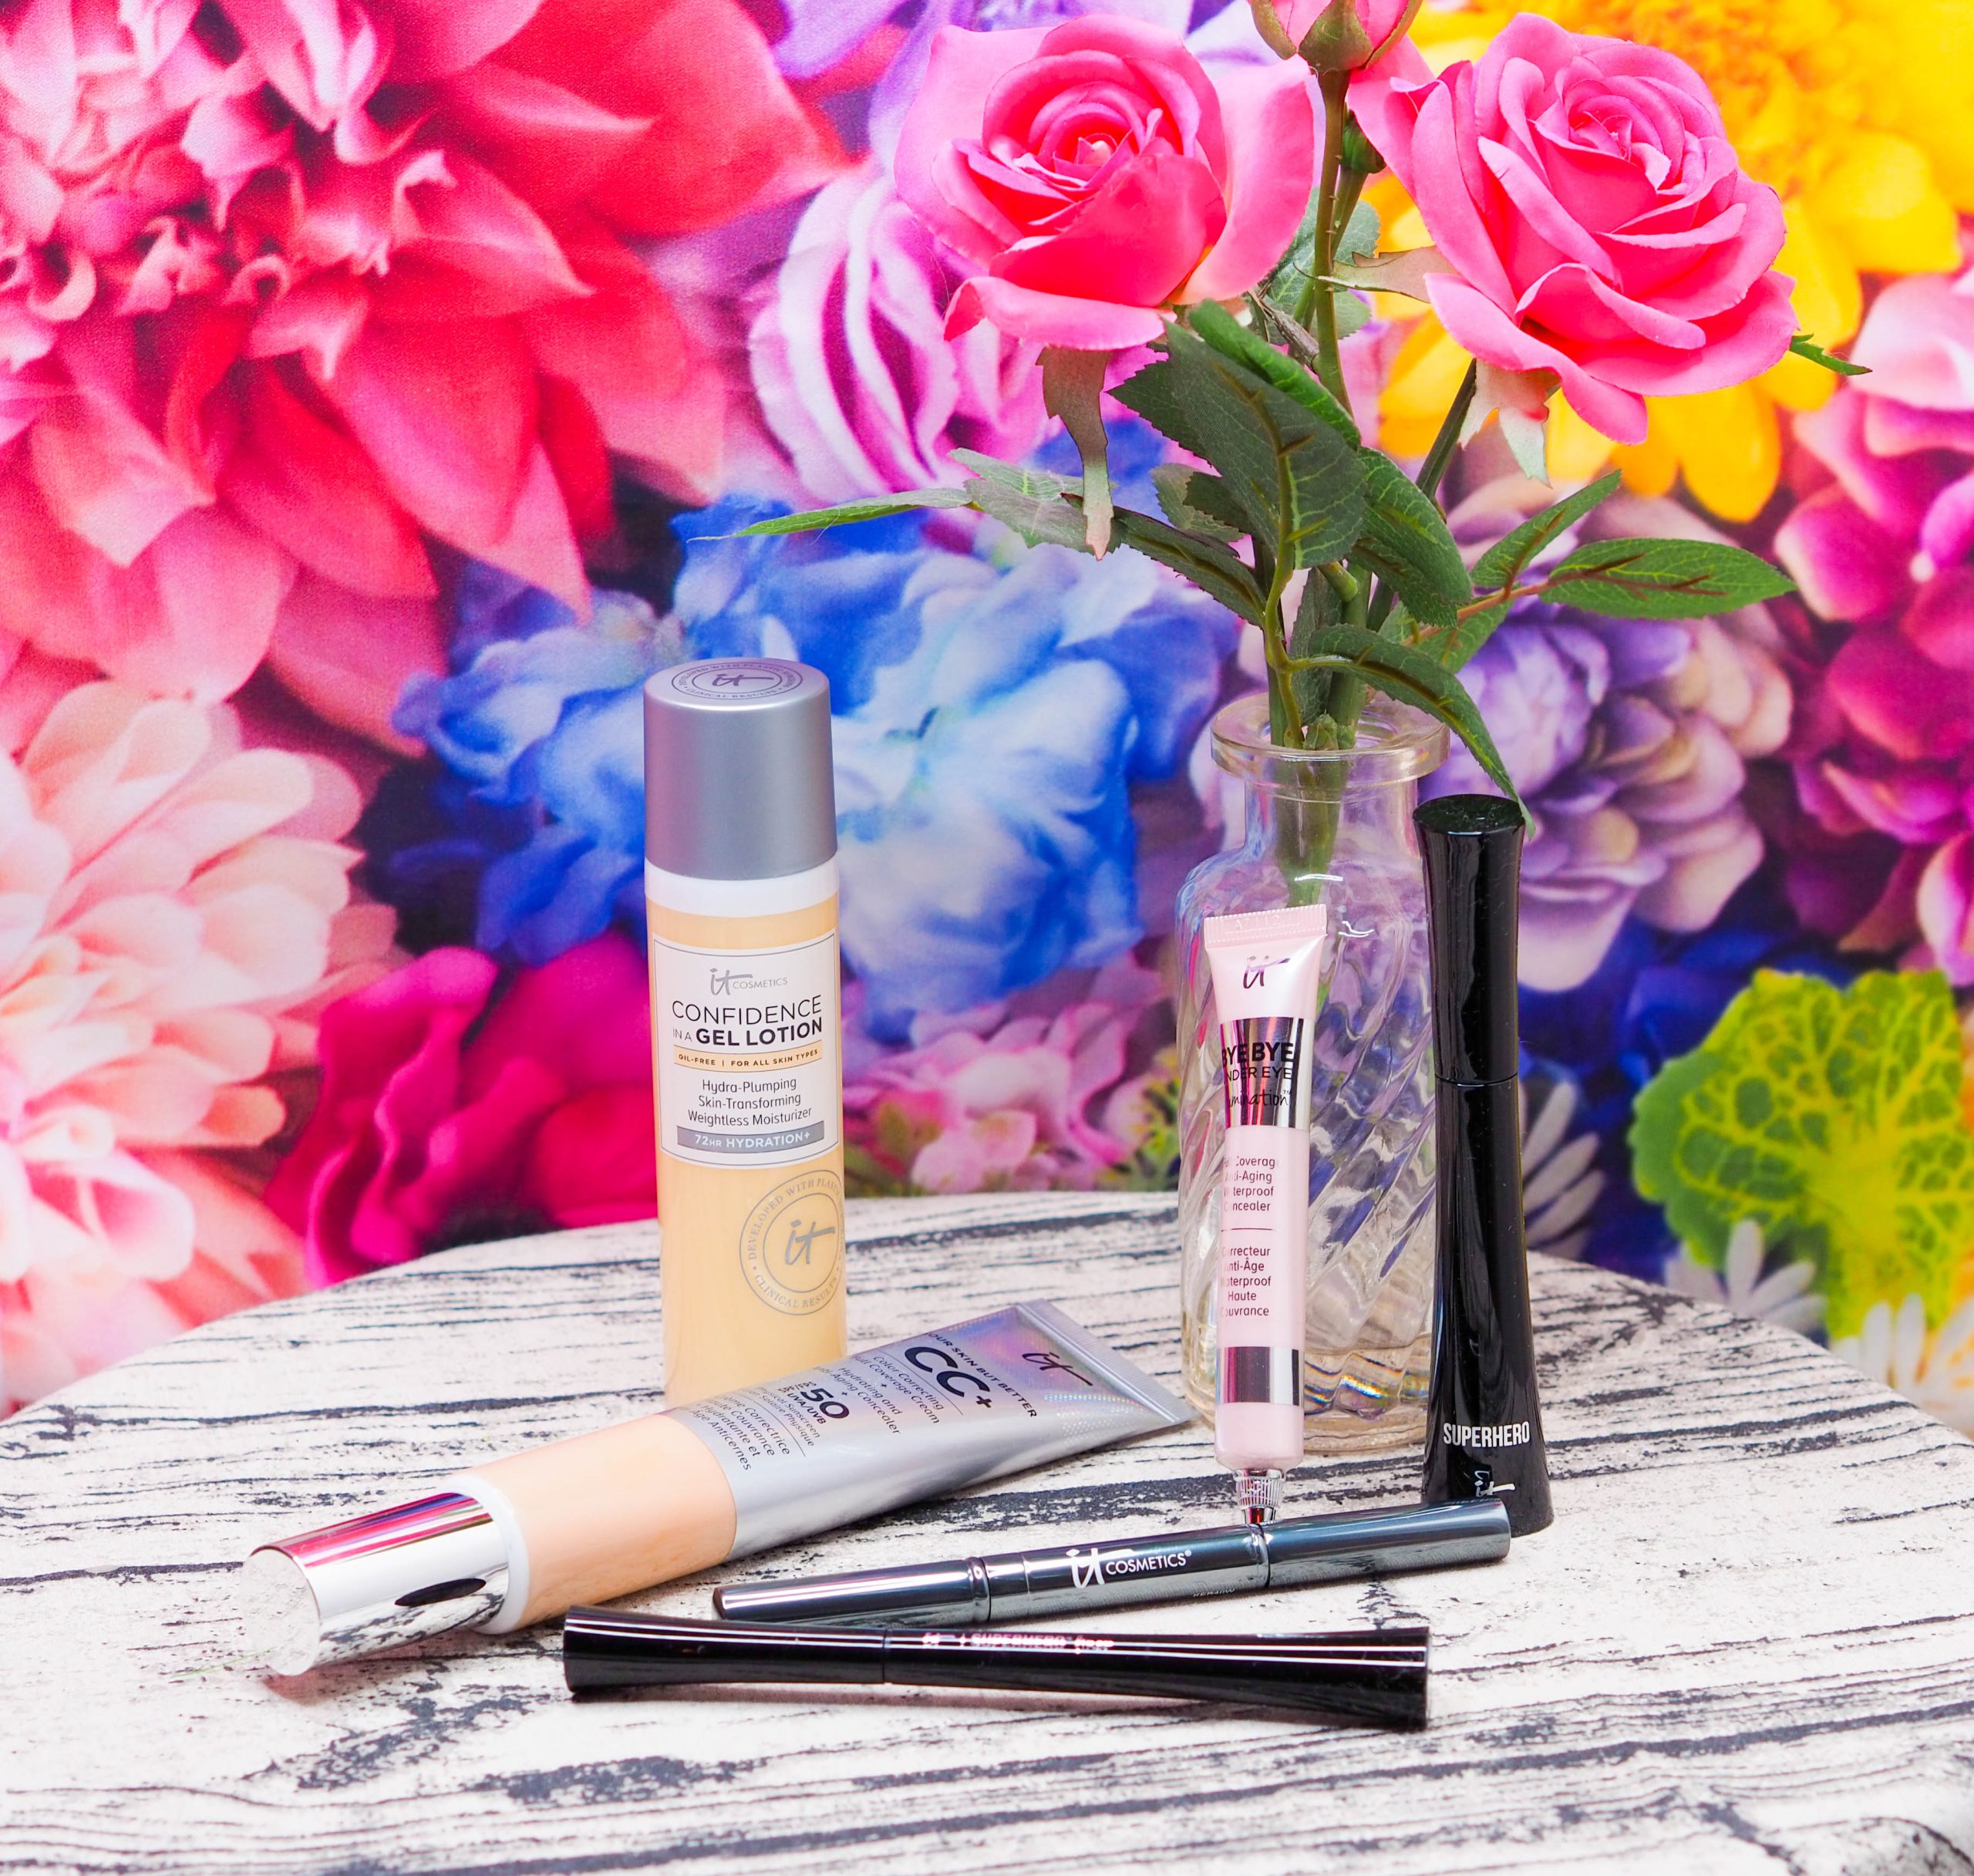 IT Cosmetics New Launches at QVC UK